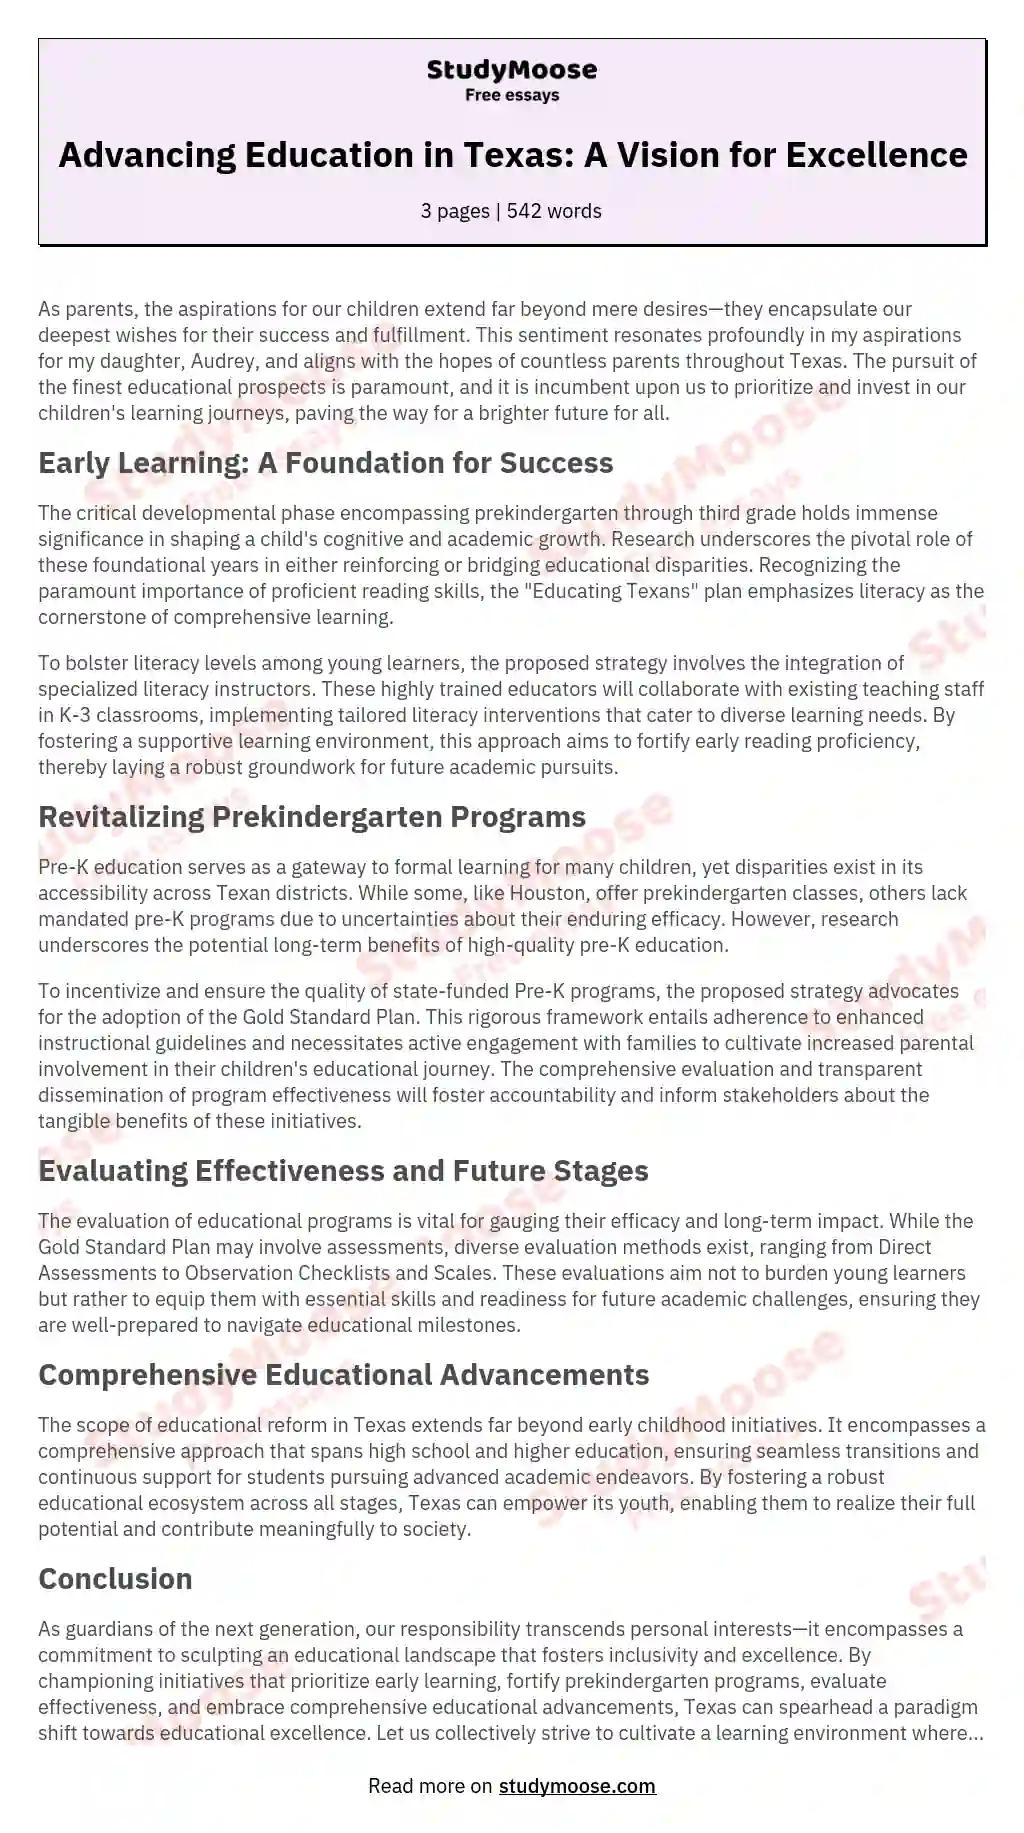 Advancing Education in Texas: A Vision for Excellence essay